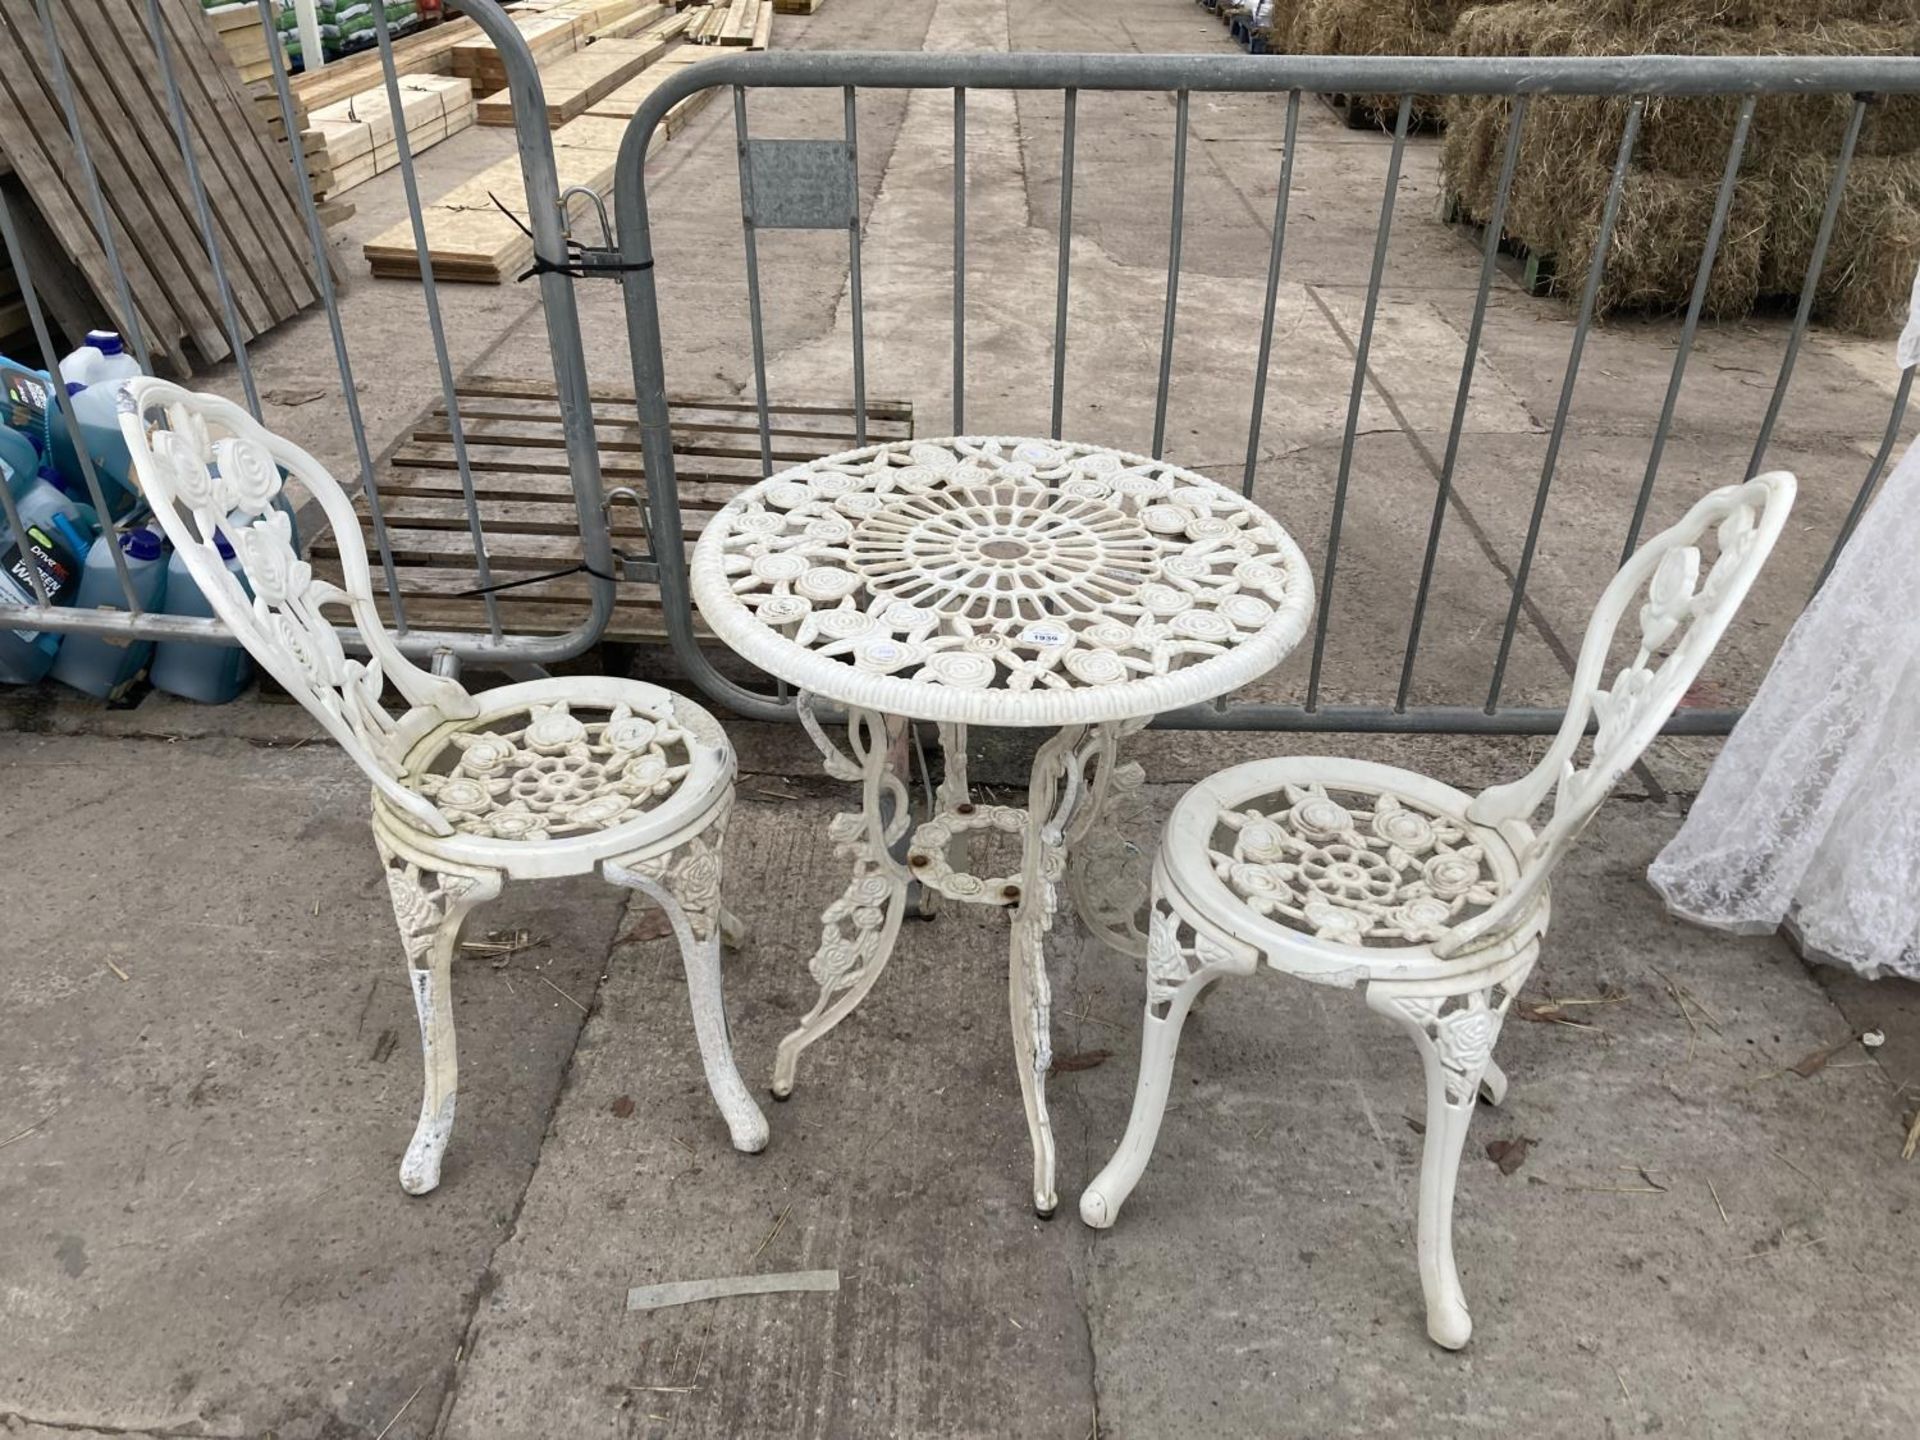 A VINTAGE STYLE METAL BISTRO SET COMPRISING OF A ROUND TABLE AND TWO CHAIRS